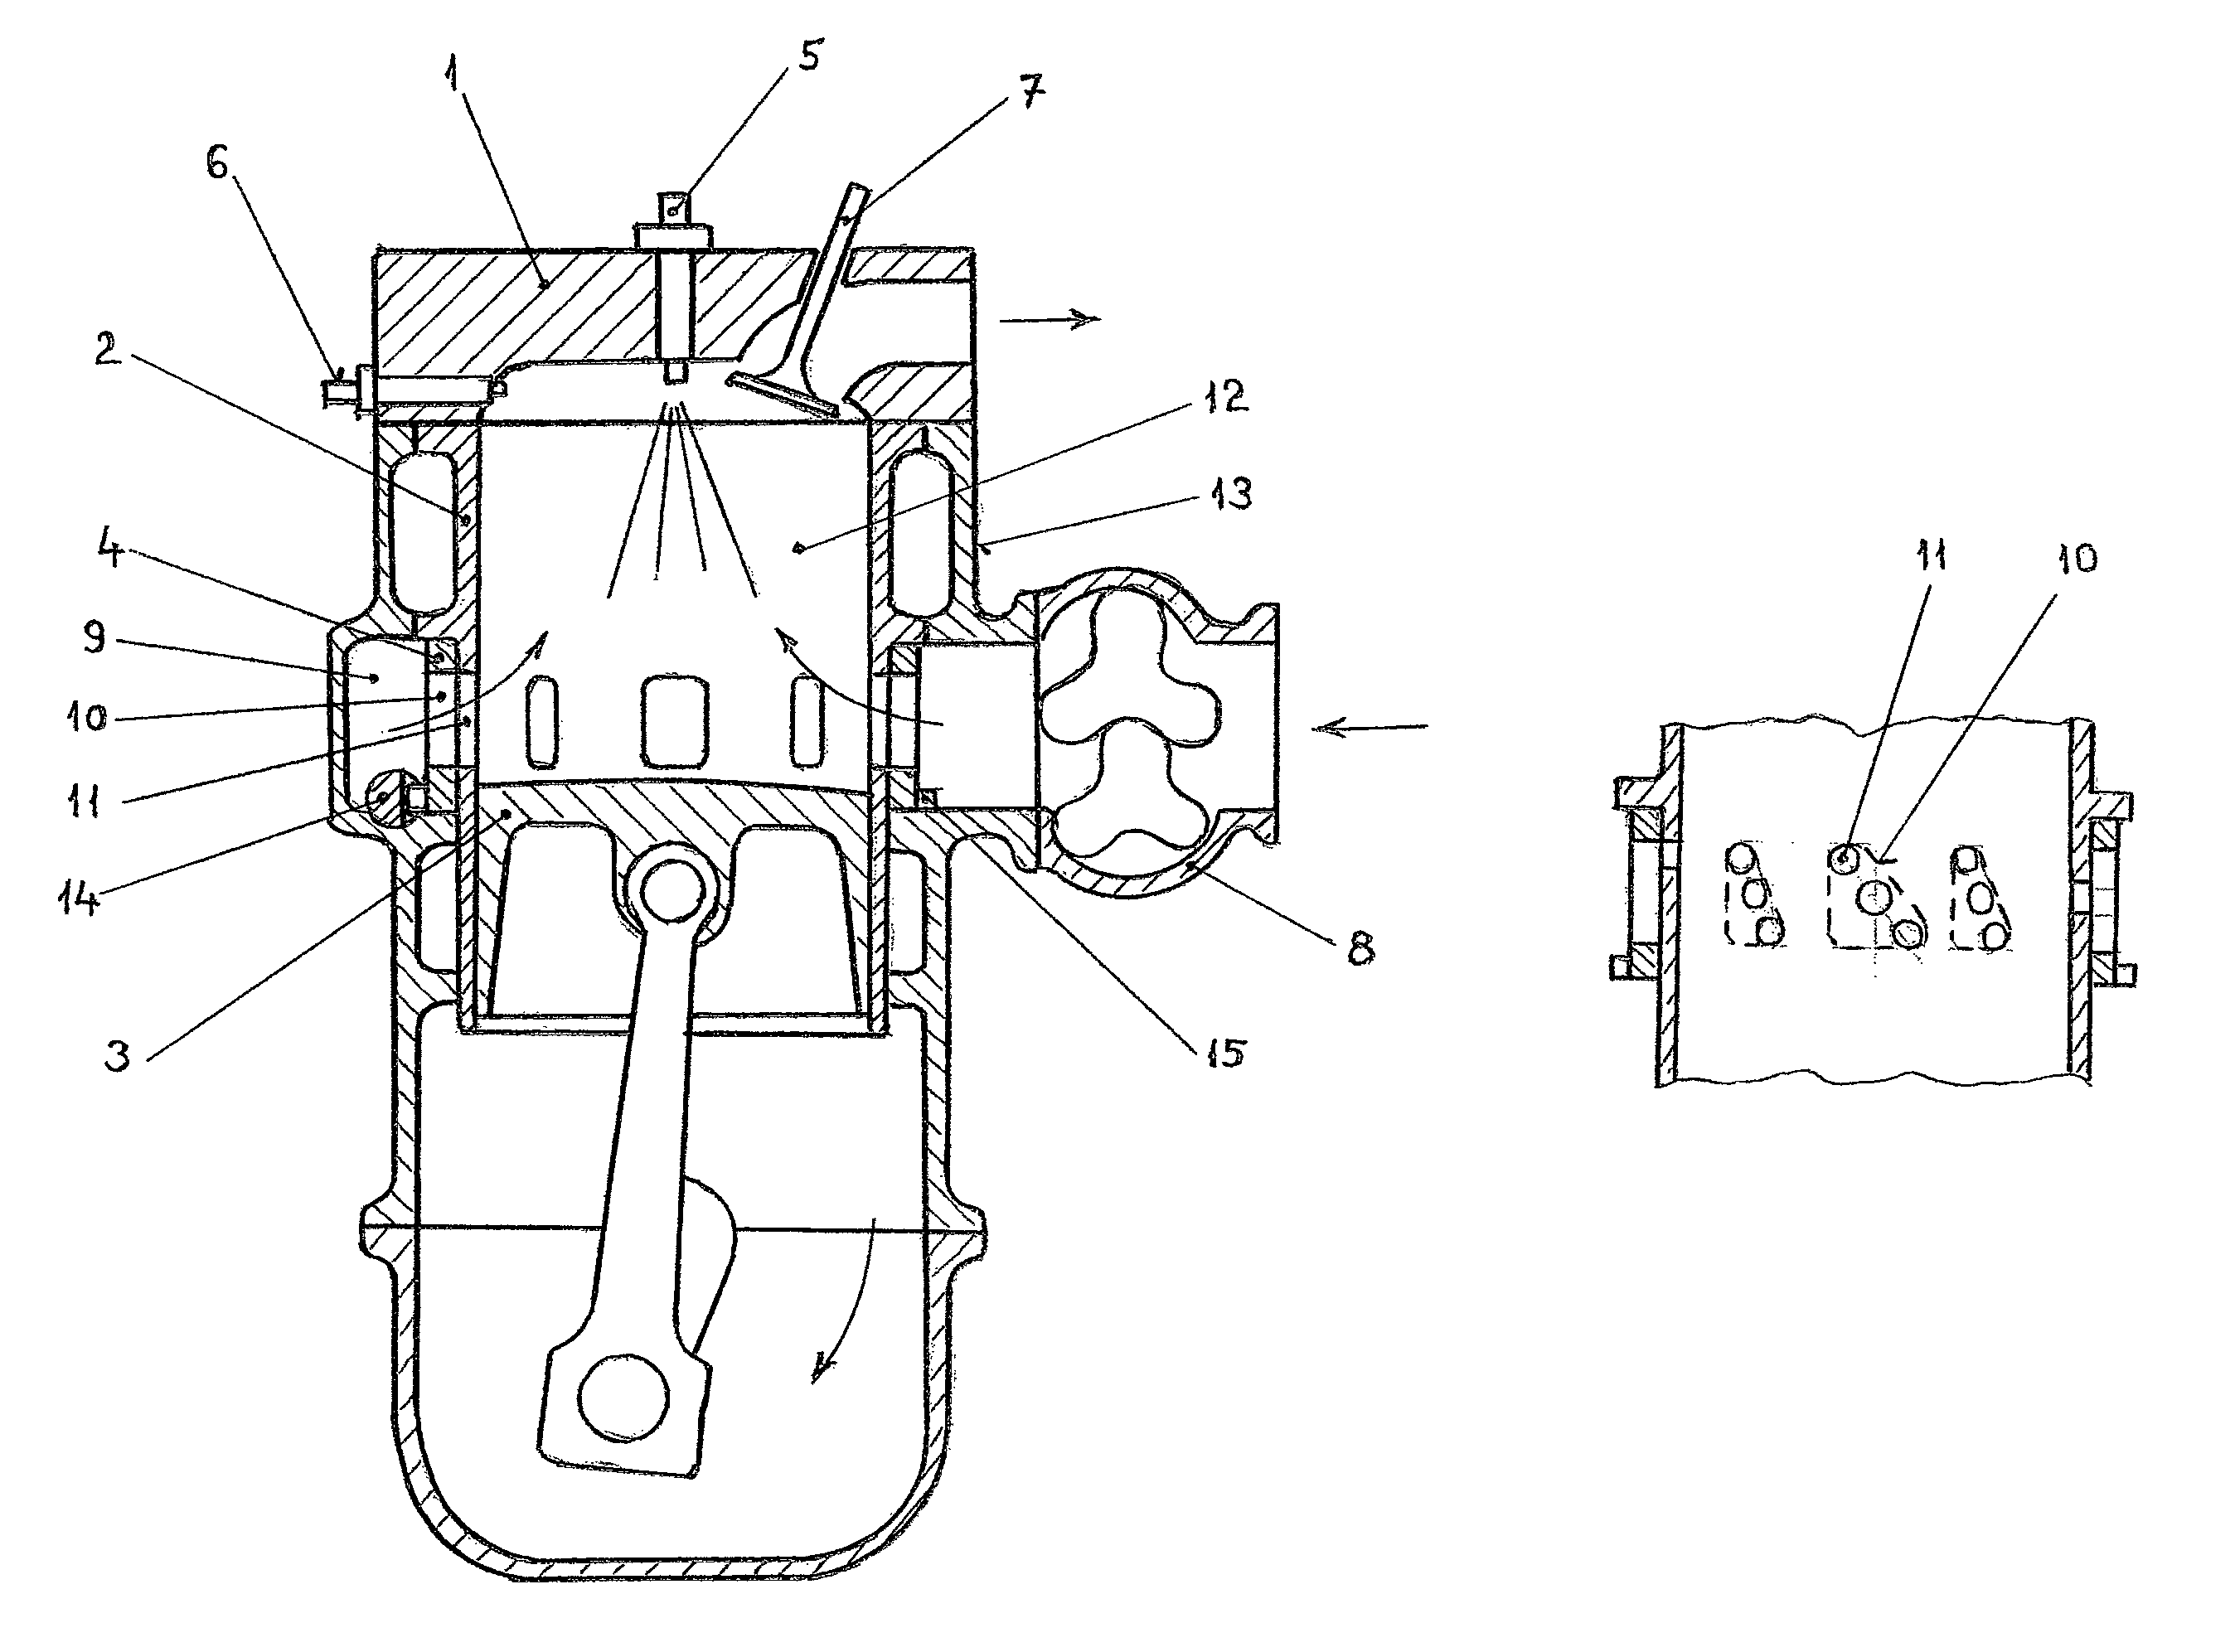 Two-stroke spark-ignition engine